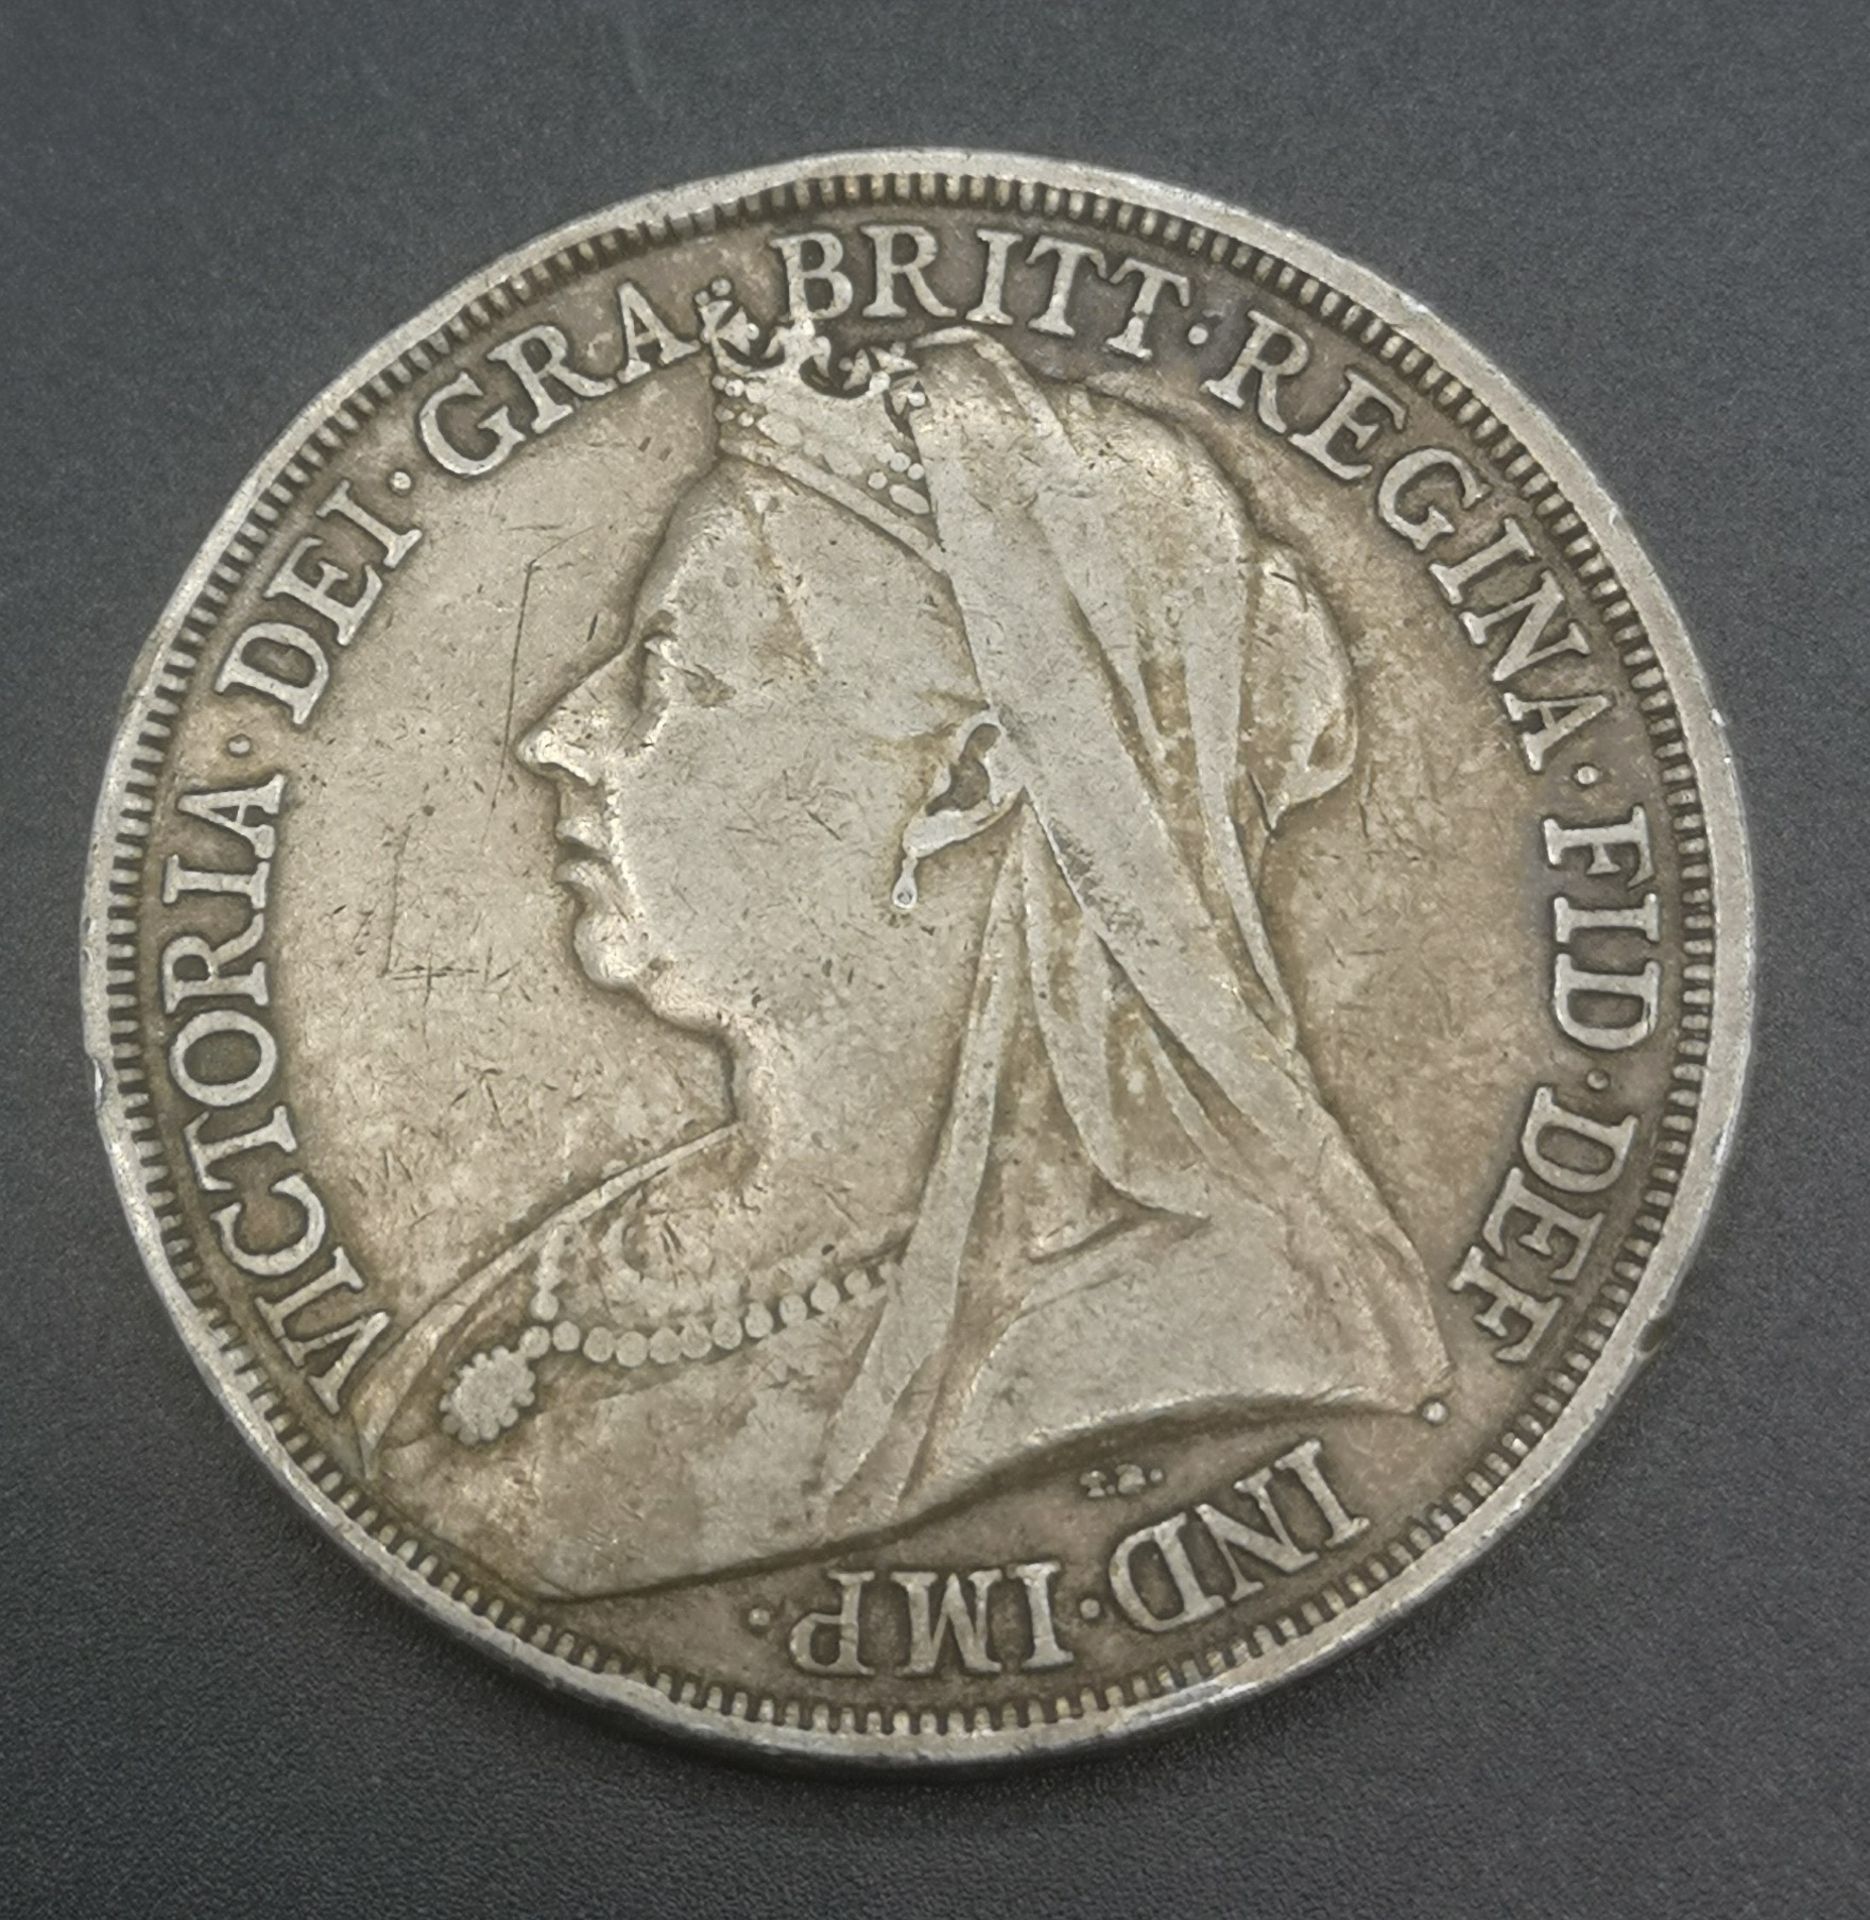 Three Queen Victoria crown coins: 1889, 1893, and 1900 - Image 10 of 10